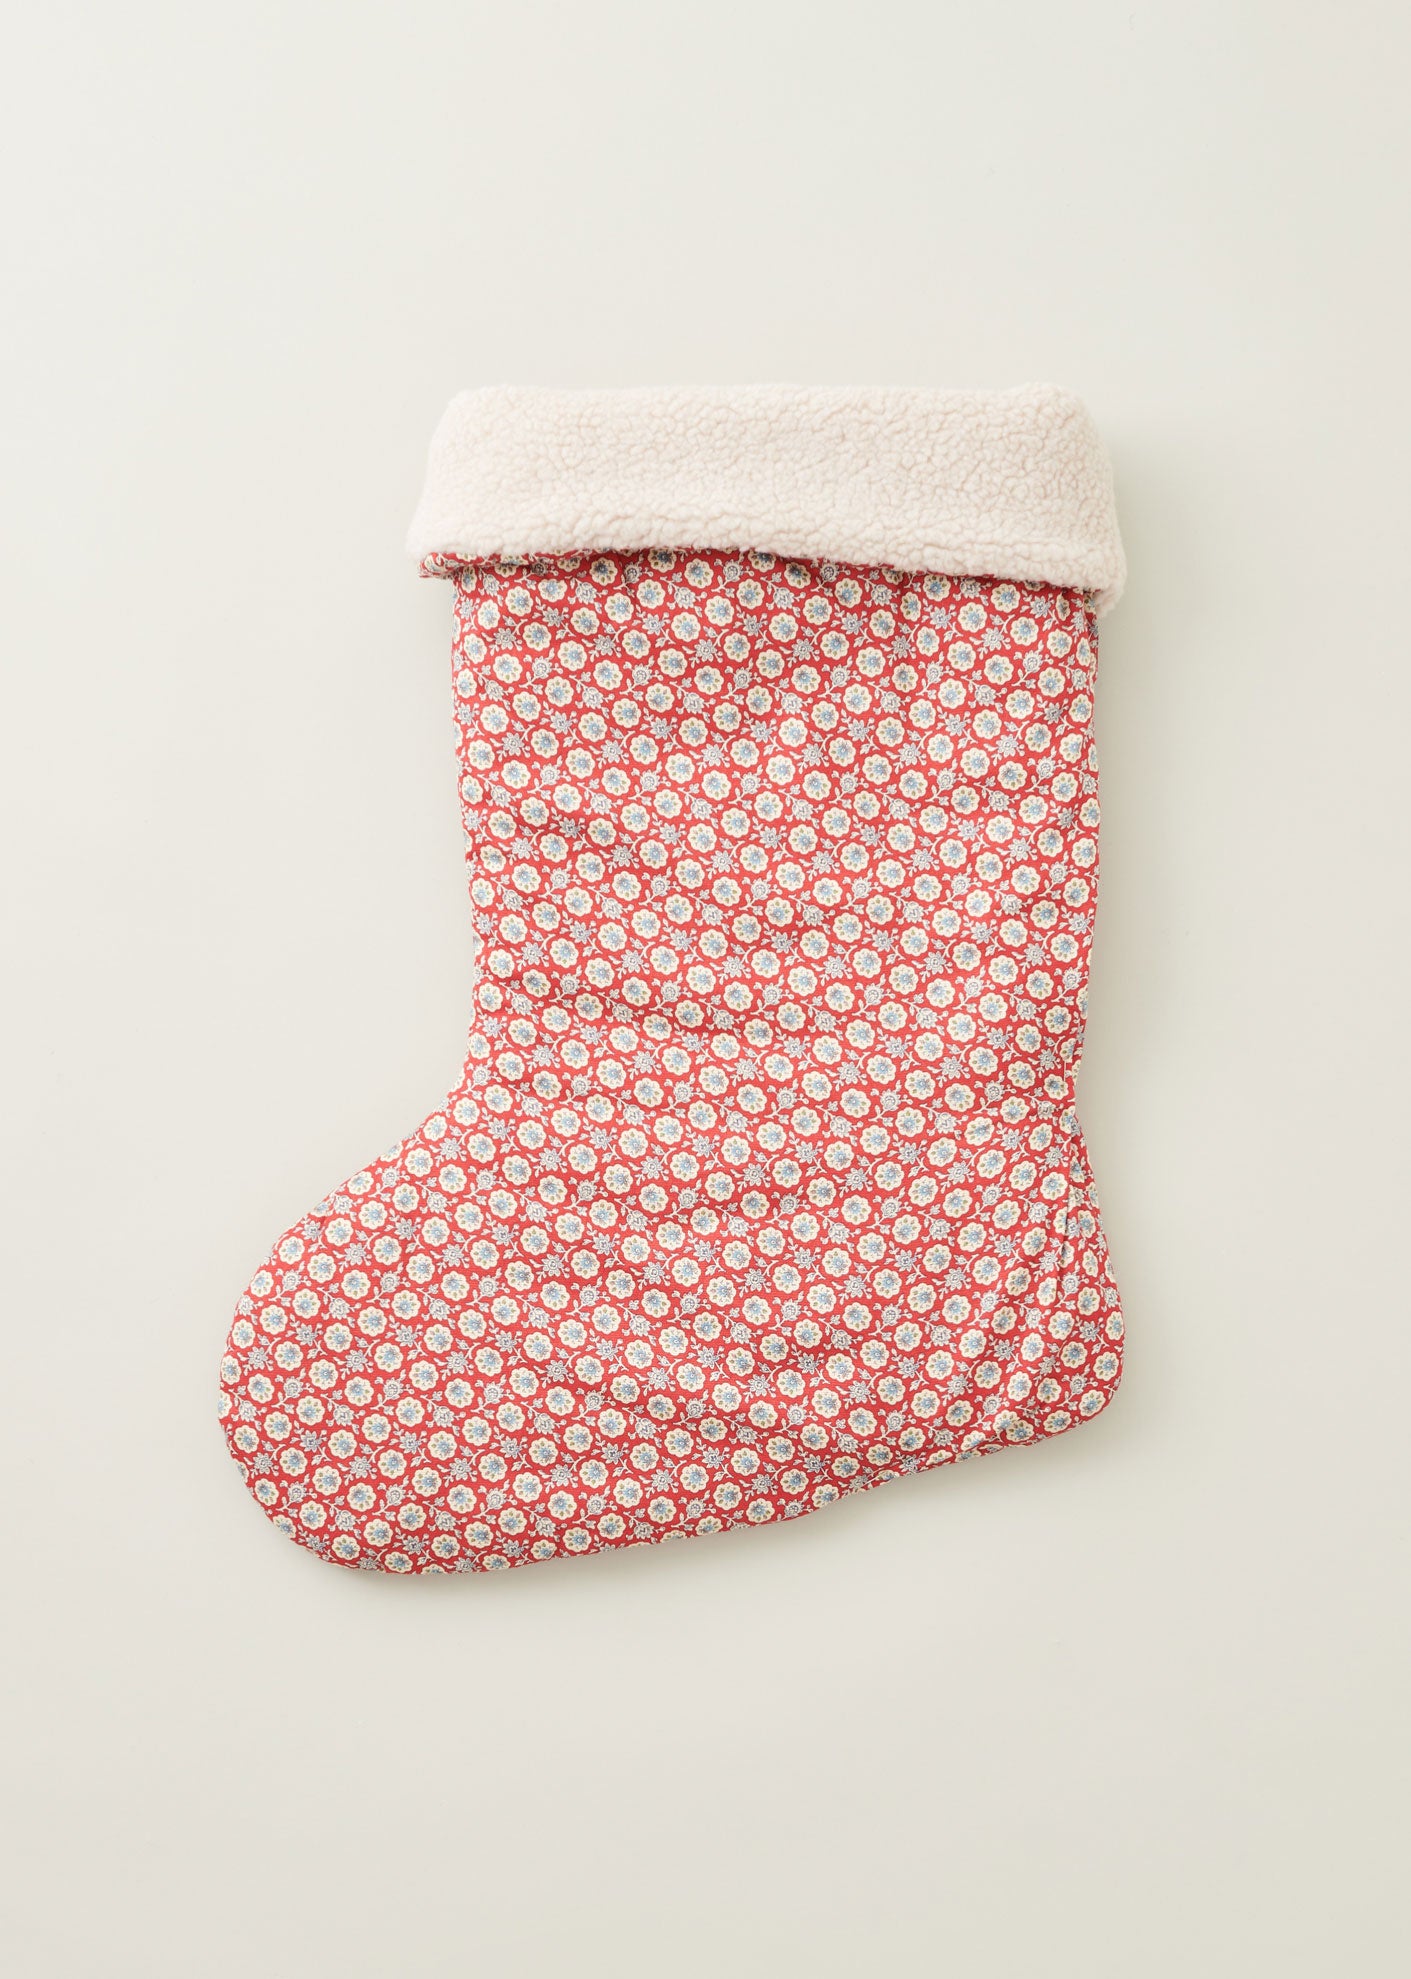 CHRISTMAS STOCKING - RED FLORAL